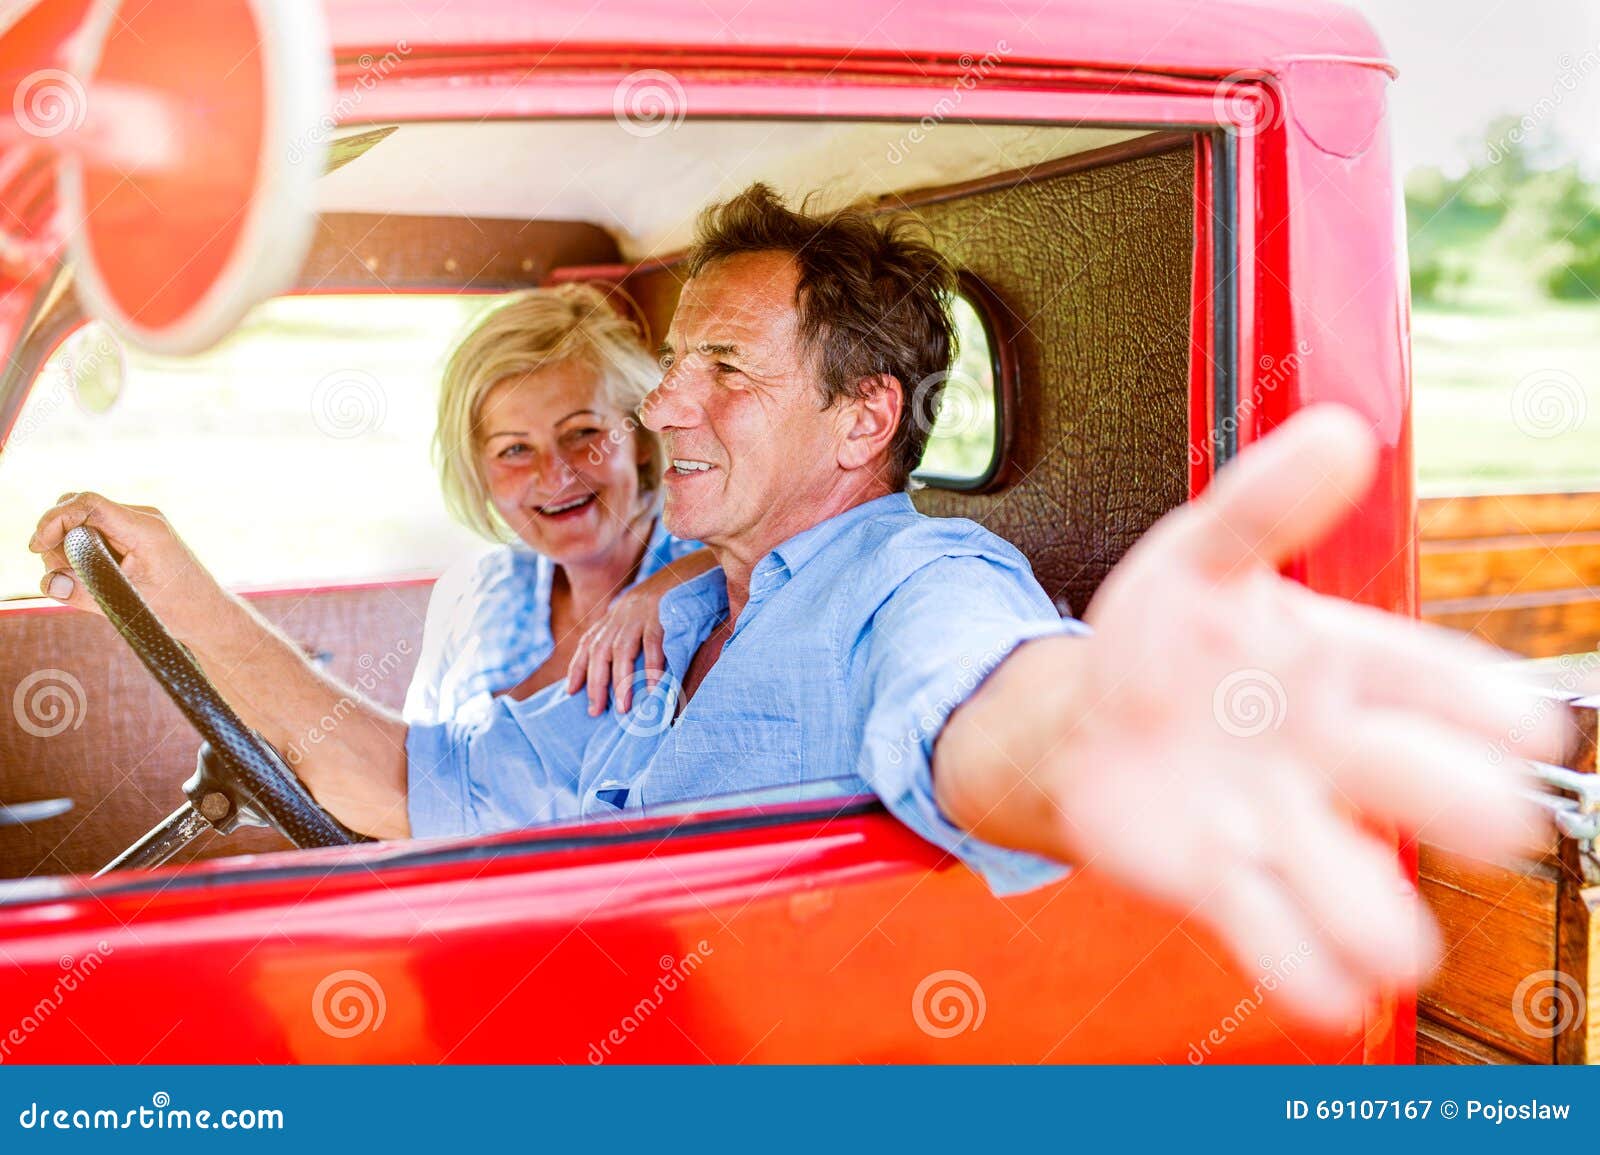 Close Up of Senior Couple Inside a Pickup Truck Stock Image - Image of ...